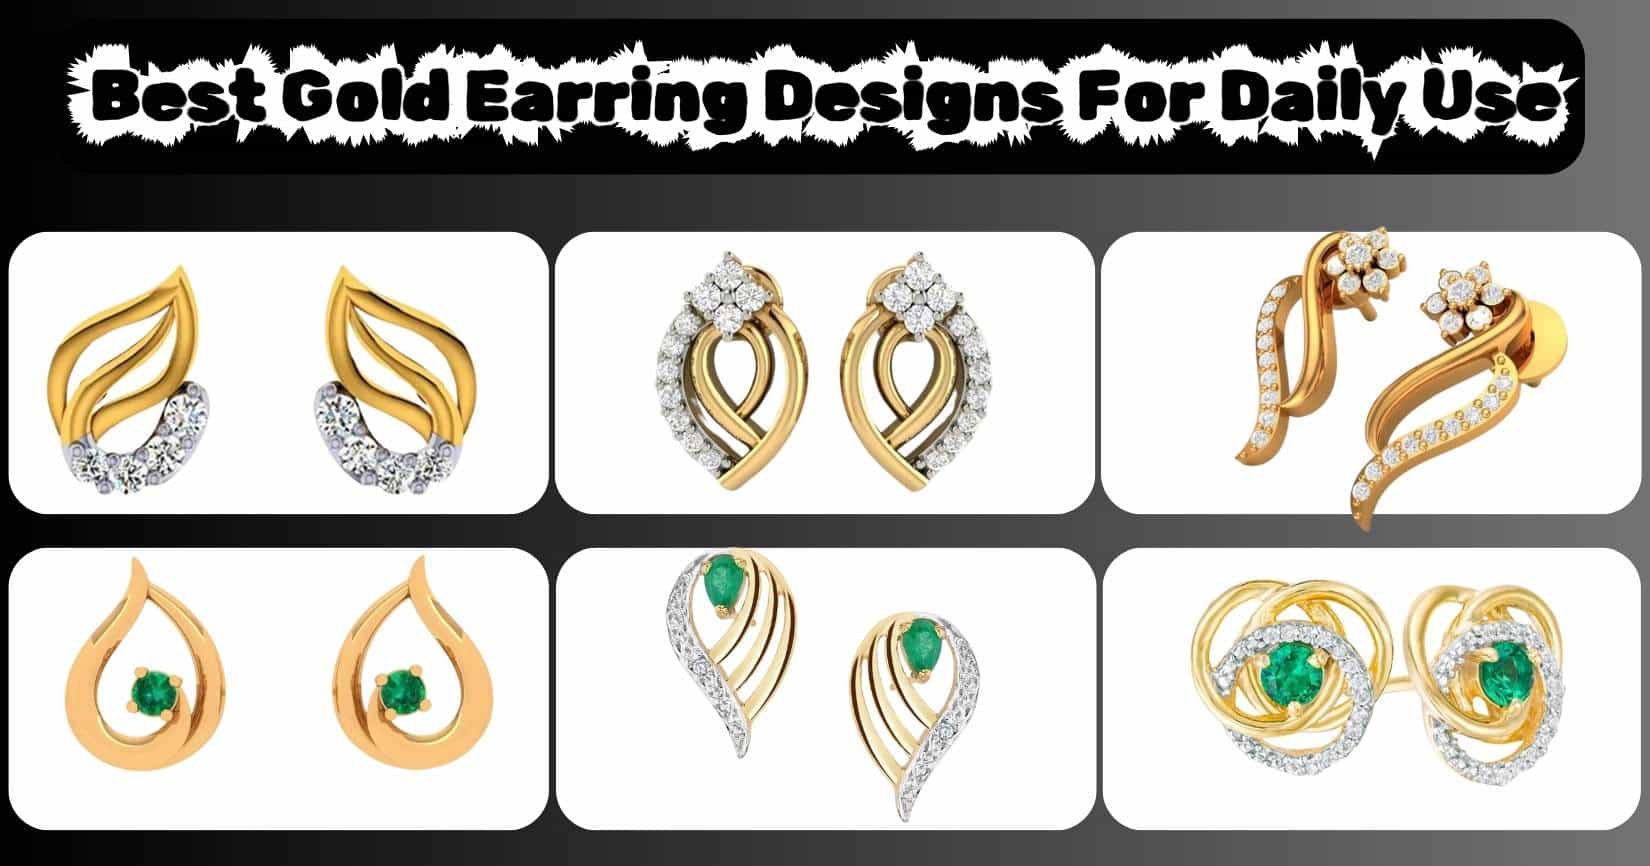 Best Gold Earring Designs For Daily Use